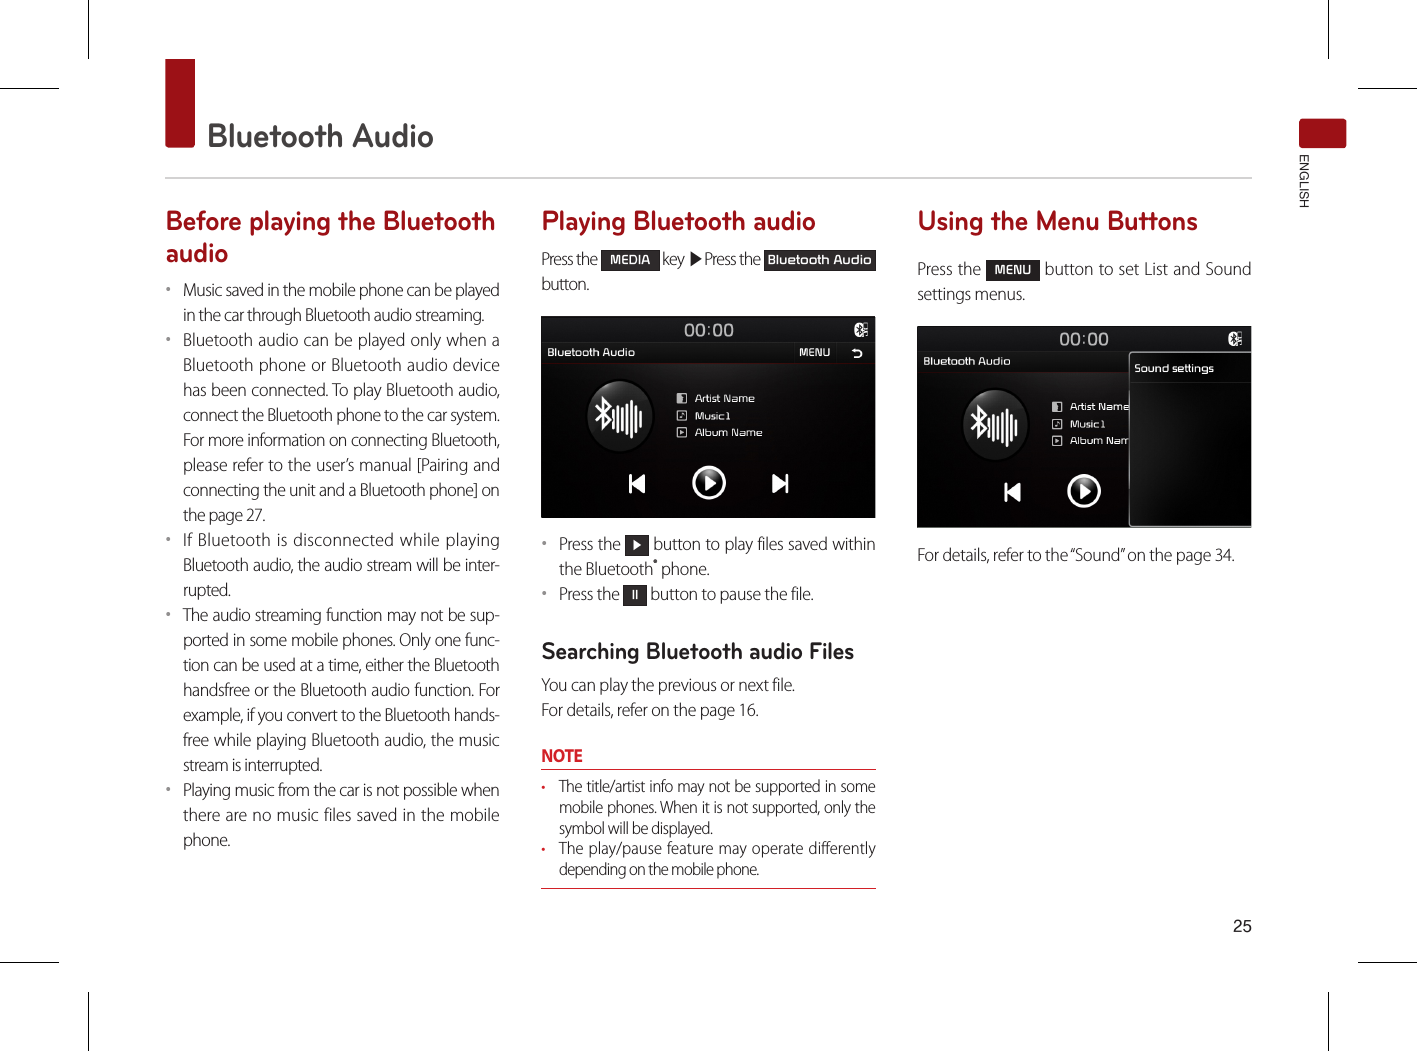 25Bluetooth AudioENGLISHBefore playing the Bluetooth audio••Music saved in the mobile phone can be played in the car through Bluetooth audio streaming. ••Bluetooth audio can be played only when a Bluetooth phone or Bluetooth audio device has been connected. To play Bluetooth audio, connect the Bluetooth phone to the car system. For more information on connecting Bluetooth, please refer to the user’s manual [Pairing and connecting the unit and a Bluetooth phone] on the page 27. ••If Bluetooth is disconnected while playing Bluetooth audio, the audio stream will be inter-rupted. ••The audio streaming function may not be sup-ported in some mobile phones. Only one func-tion can be used at a time, either the Bluetooth handsfree or the Bluetooth audio function. For example, if you convert to the Bluetooth hands-free while playing Bluetooth audio, the music stream is interrupted. ••Playing music from the car is not possible when there are no music files saved in the mobile phone. Playing Bluetooth audioPress the MEDIA key ▶Press the Bluetooth Audio  button.••Press the ▶ button to play files saved within the Bluetooth® phone.••Press the ll button to pause the file.Searching Bluetooth audio FilesYou can play the previous or next file. For details, refer on the page 16.NOTE• The title/artist info may not be supported in some mobile phones. When it is not supported, only the symbol will be displayed.• The play/pause feature may operate differently depending on the mobile phone.Using the Menu ButtonsPress the MENU button to set List and Sound settings menus.For details, refer to the “Sound” on the page 34.